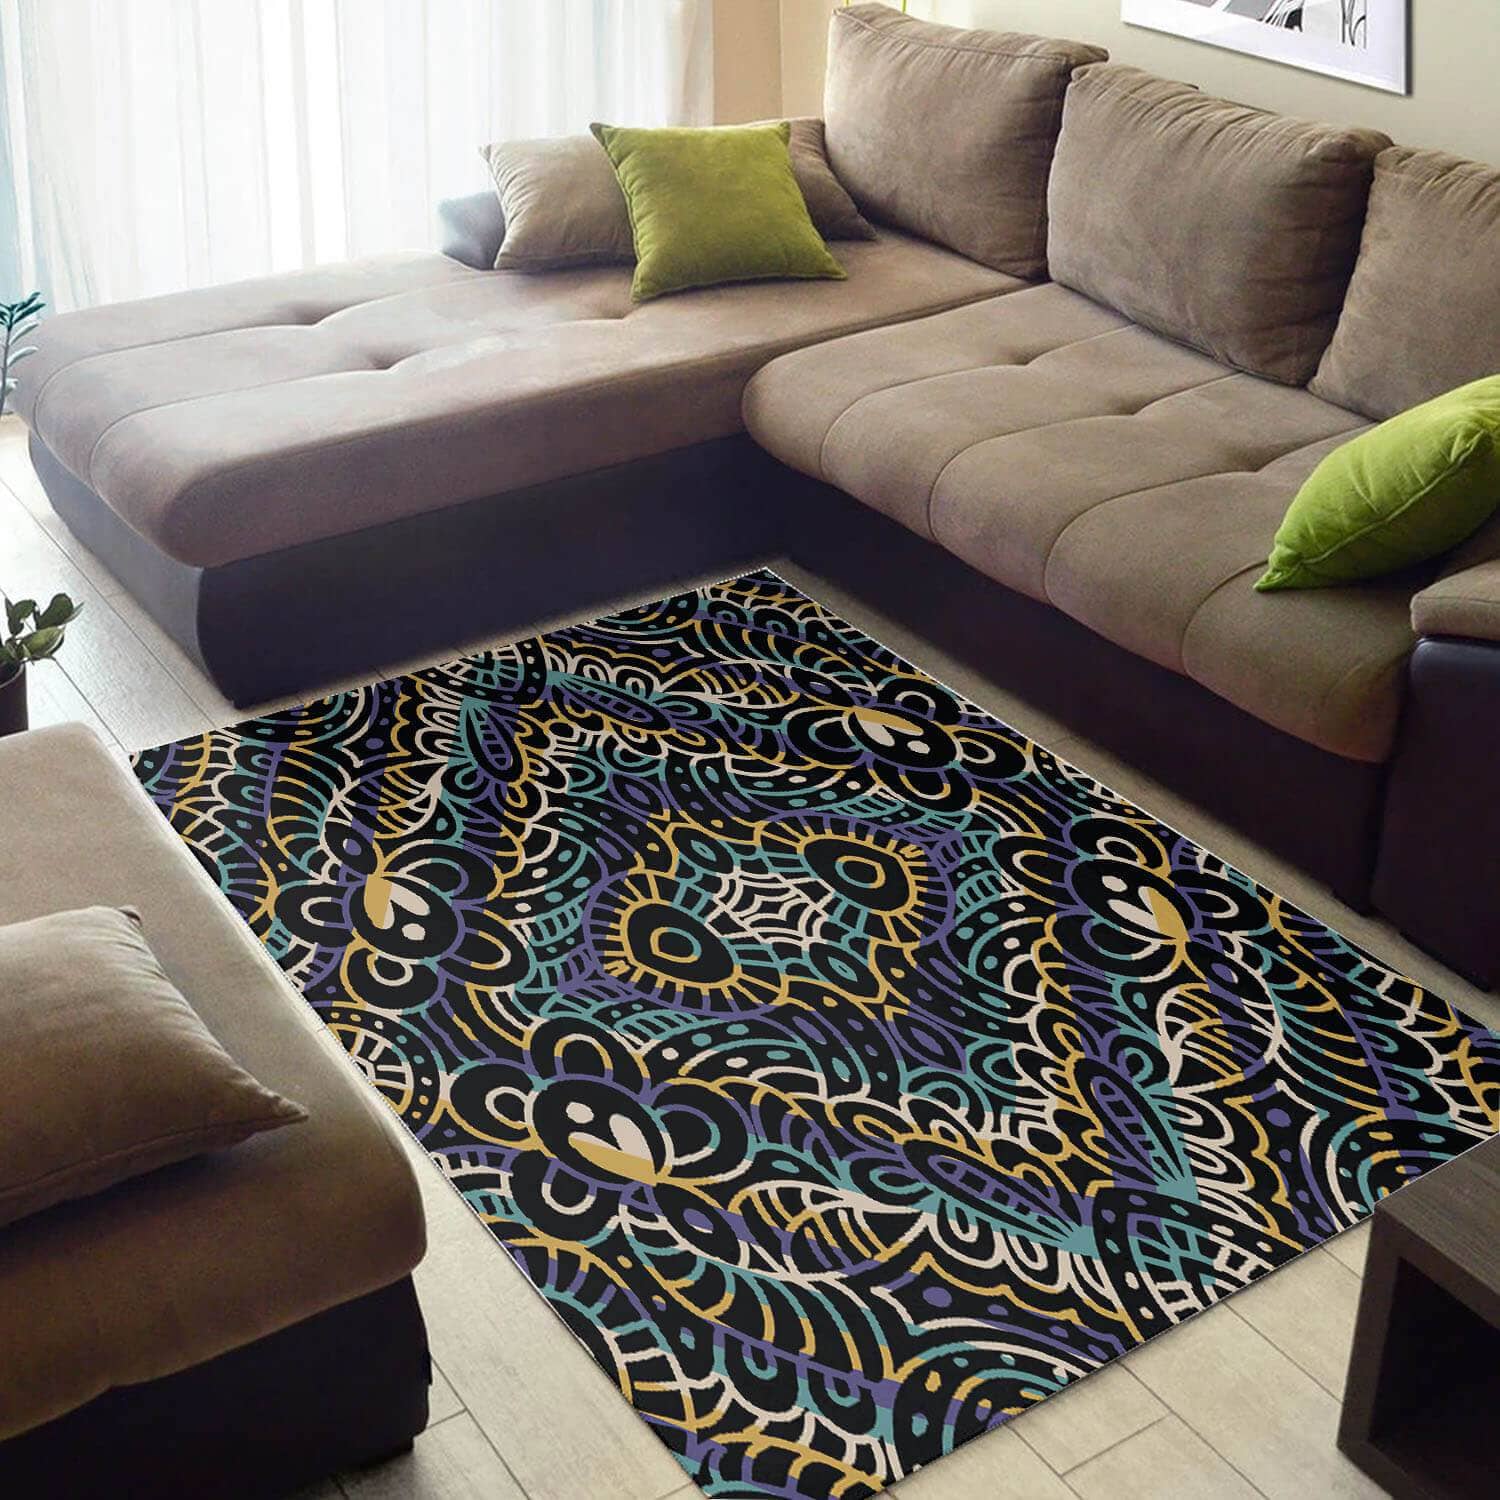 Inspired African Cool American Art Afrocentric Pattern Themed Carpet Style Rug